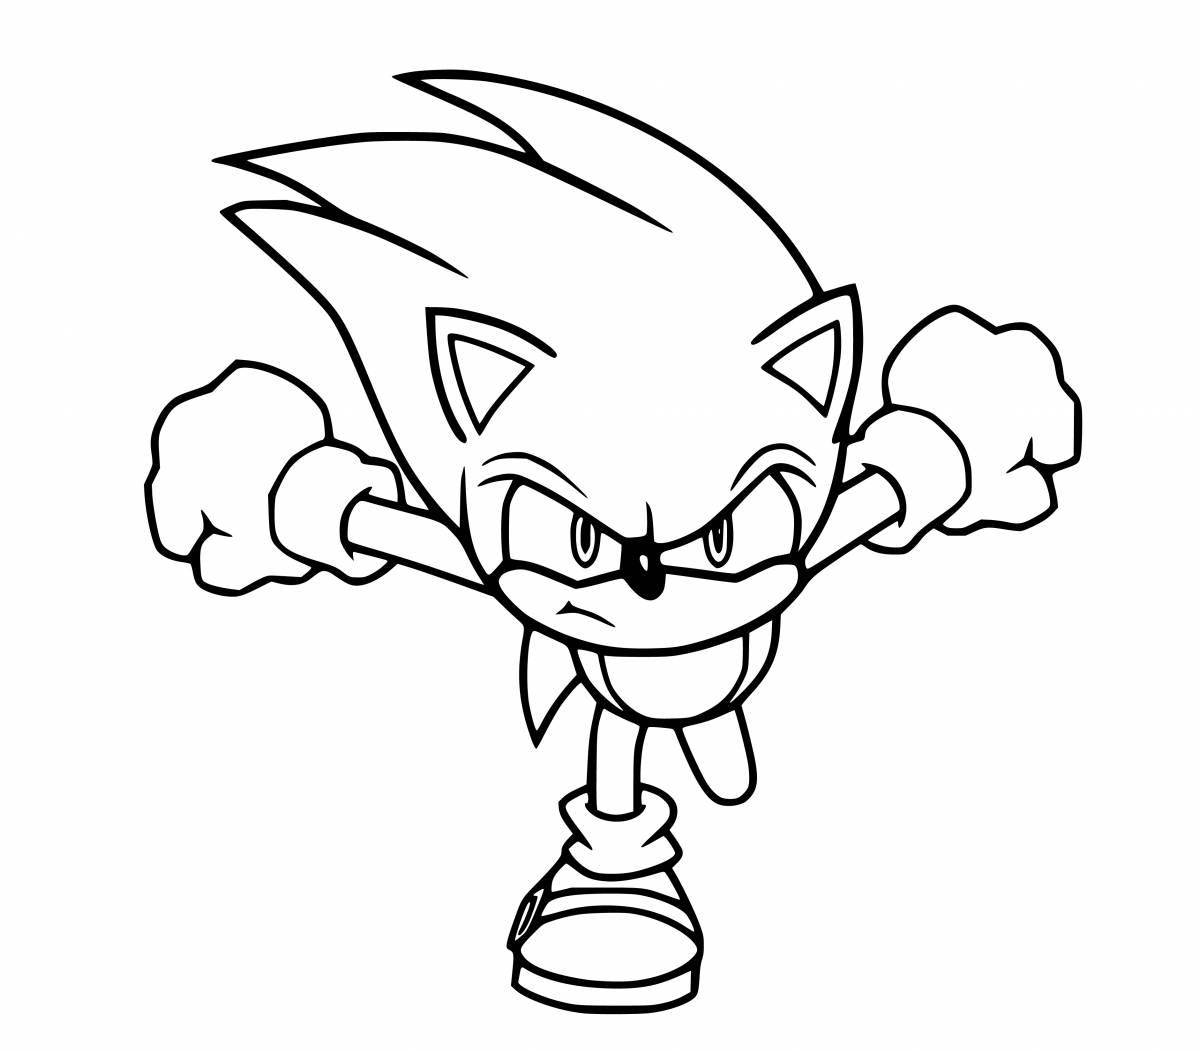 Amazing sonic the hedgehog coloring book